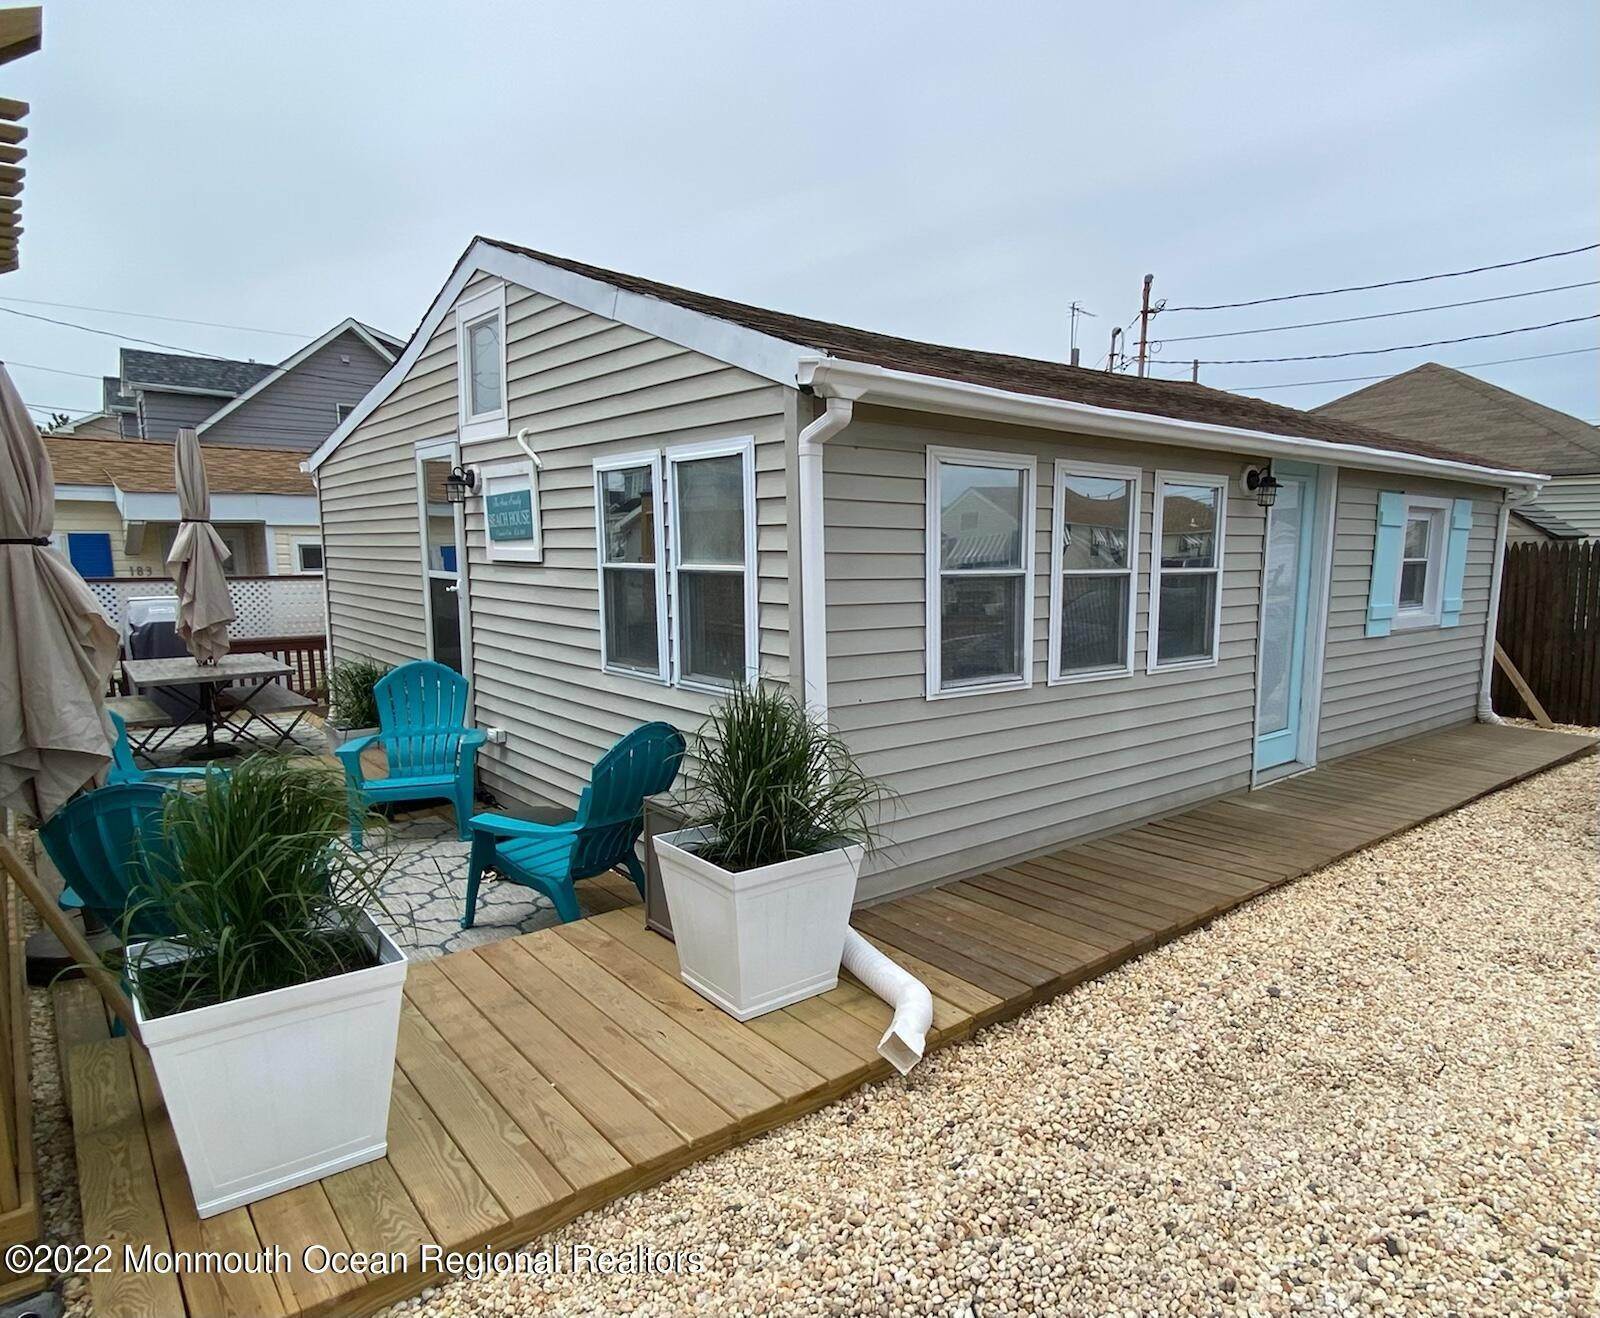 Property for Sale at 182 Central Avenue South Seaside Park, New Jersey 08752 United States